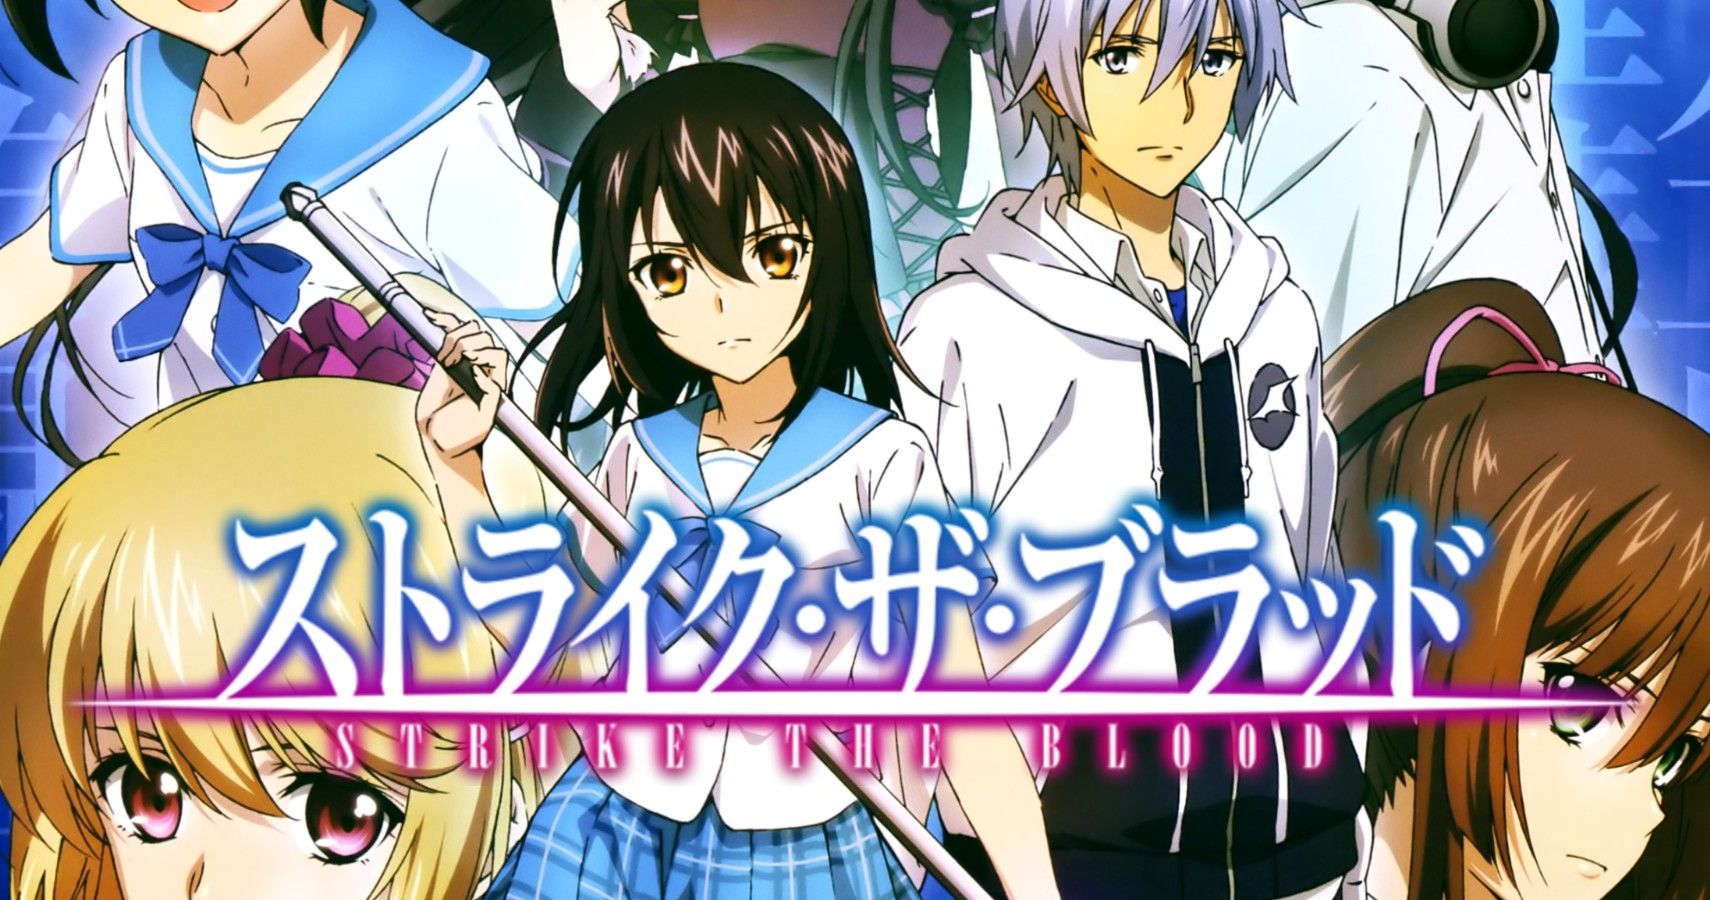 10 Things You Didn't Know About Strike The Blood